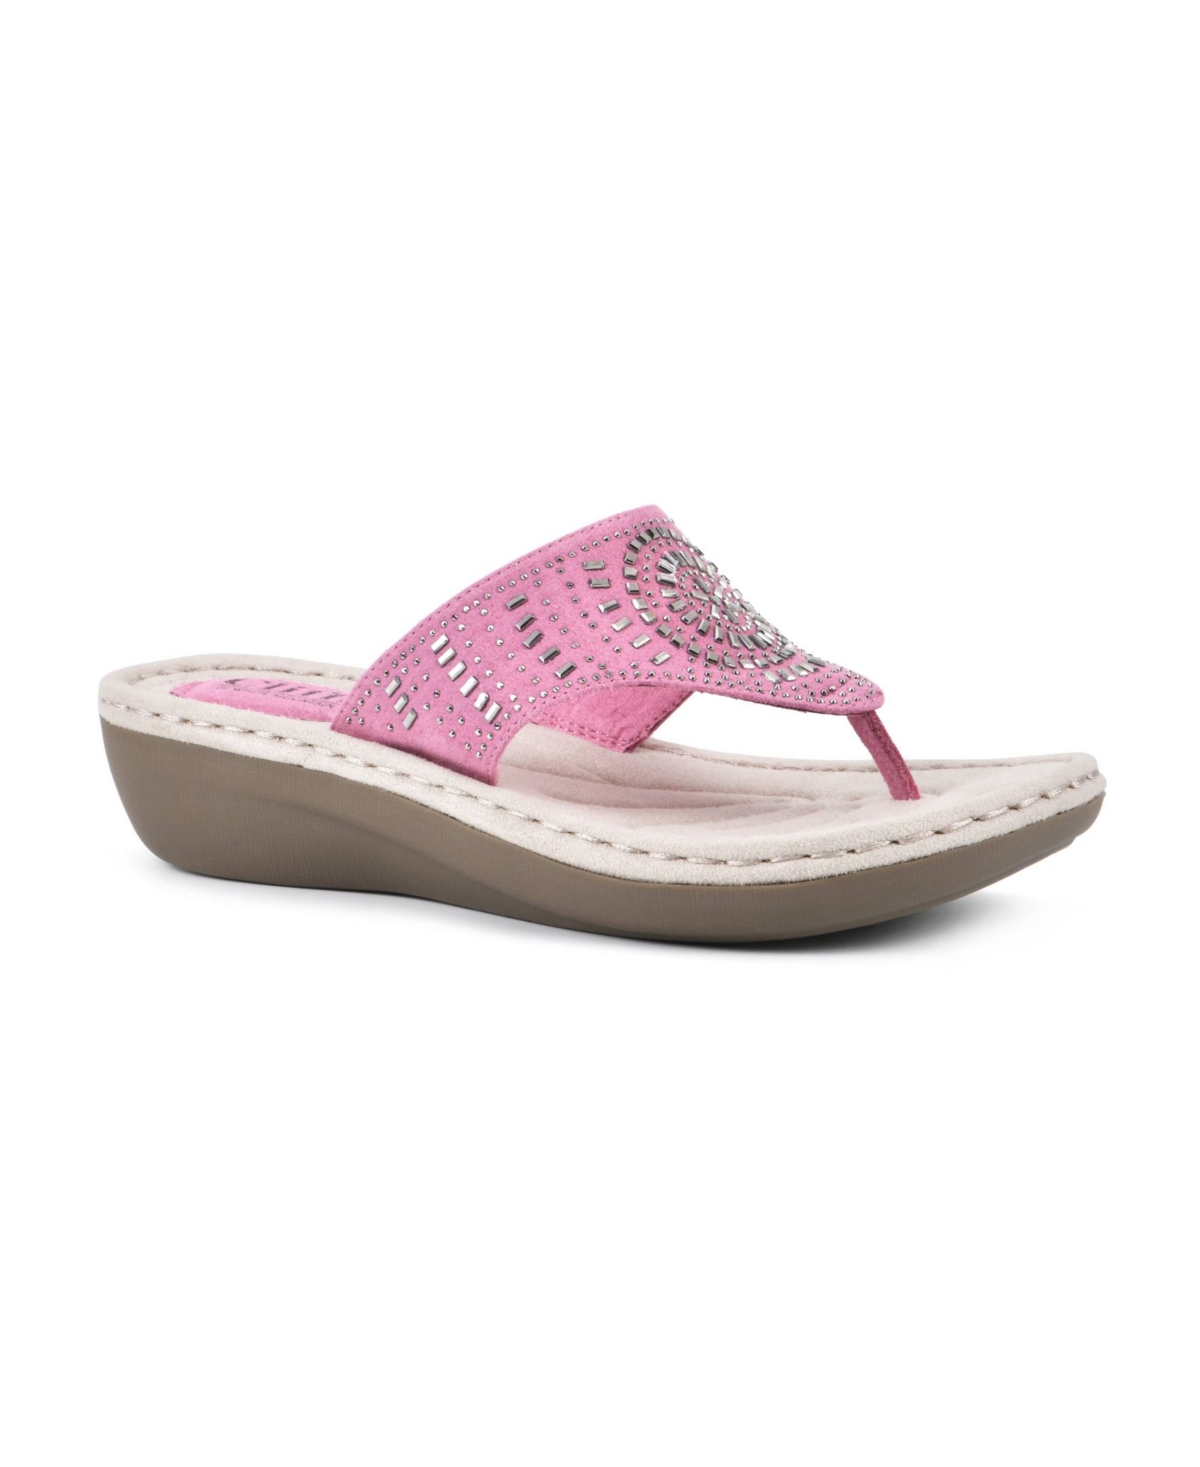 Cliffs by White Mountain Cienna Comfort Thong Sandals Women's Shoes